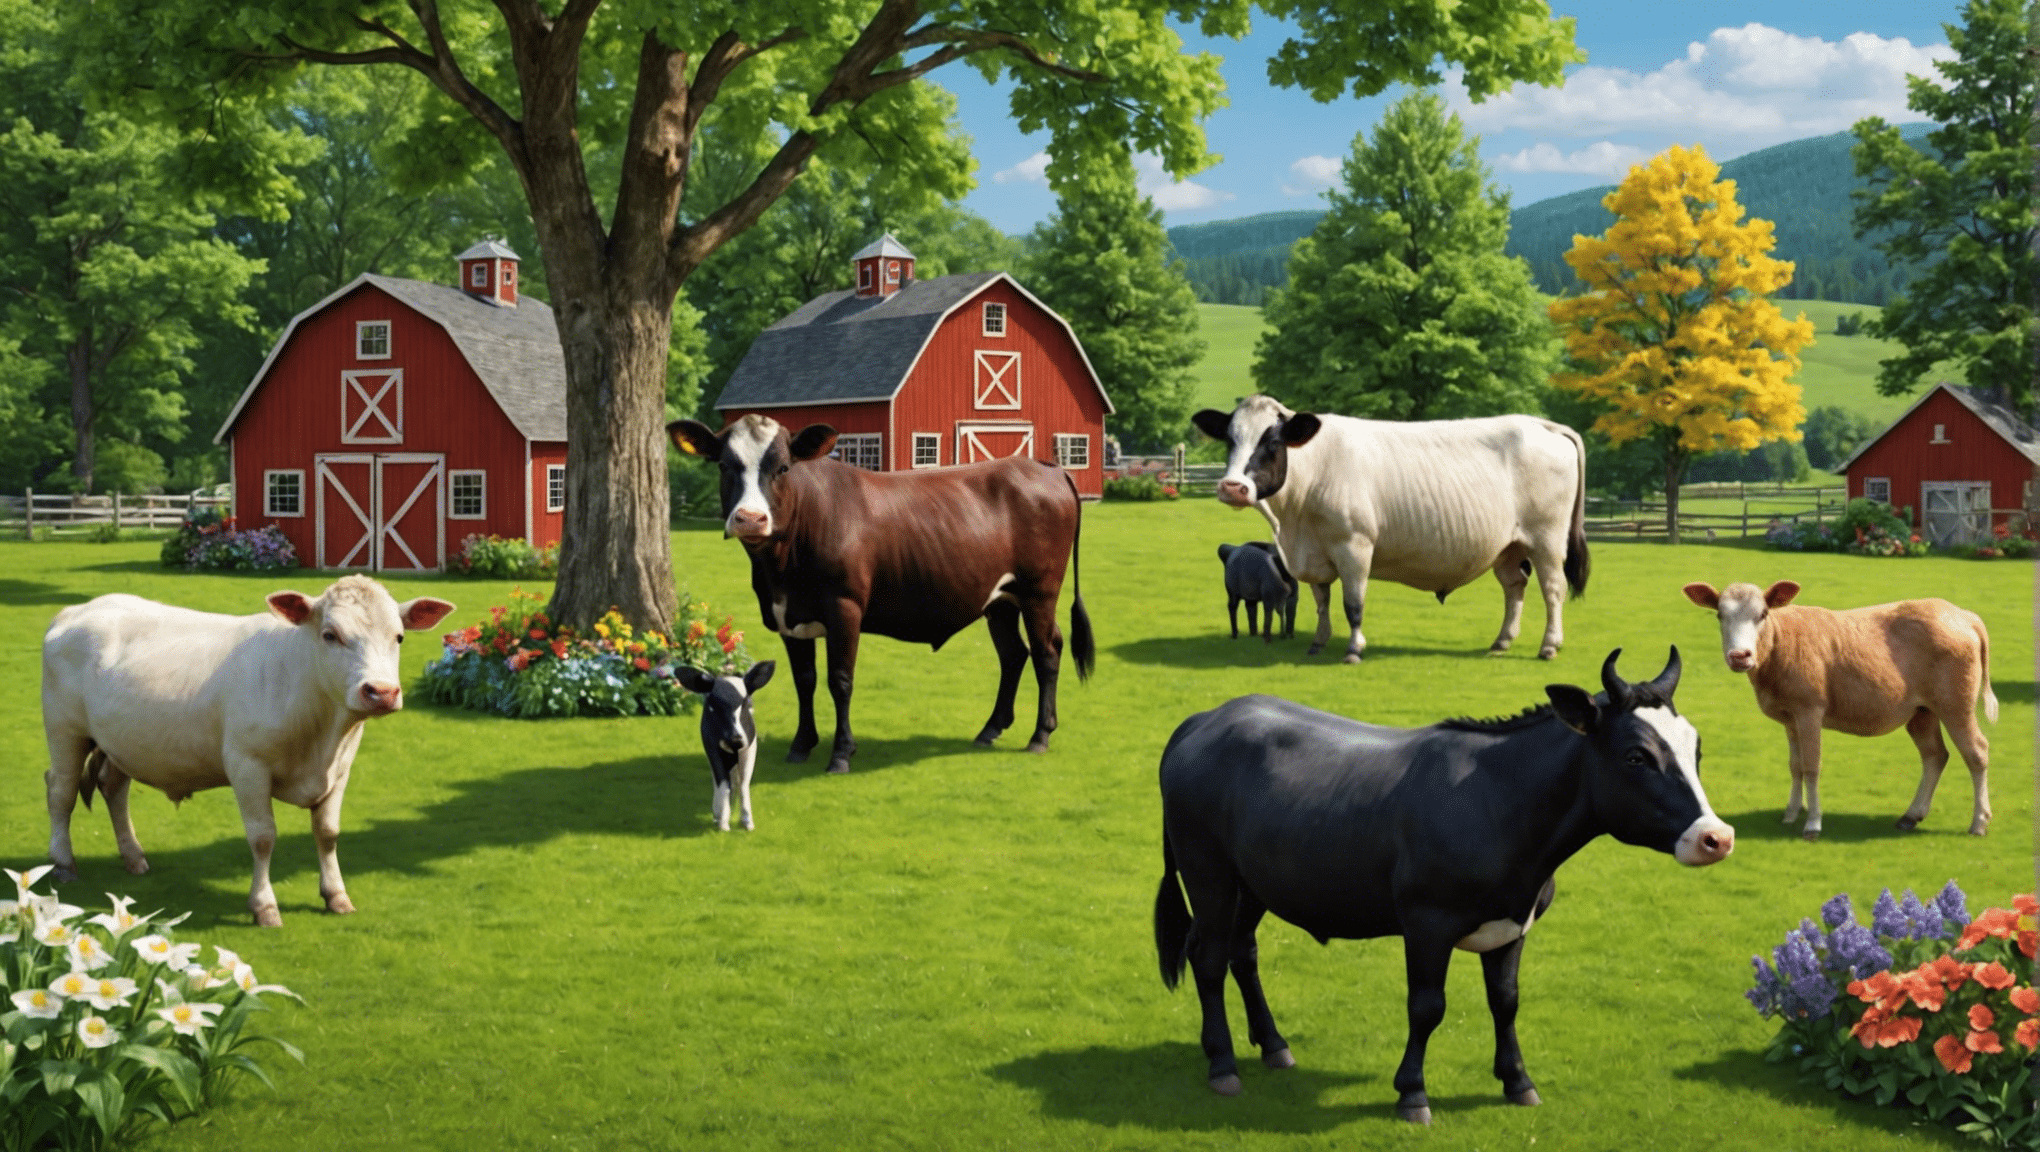 discover the perfect farm animals for your backyard with our comprehensive guide.